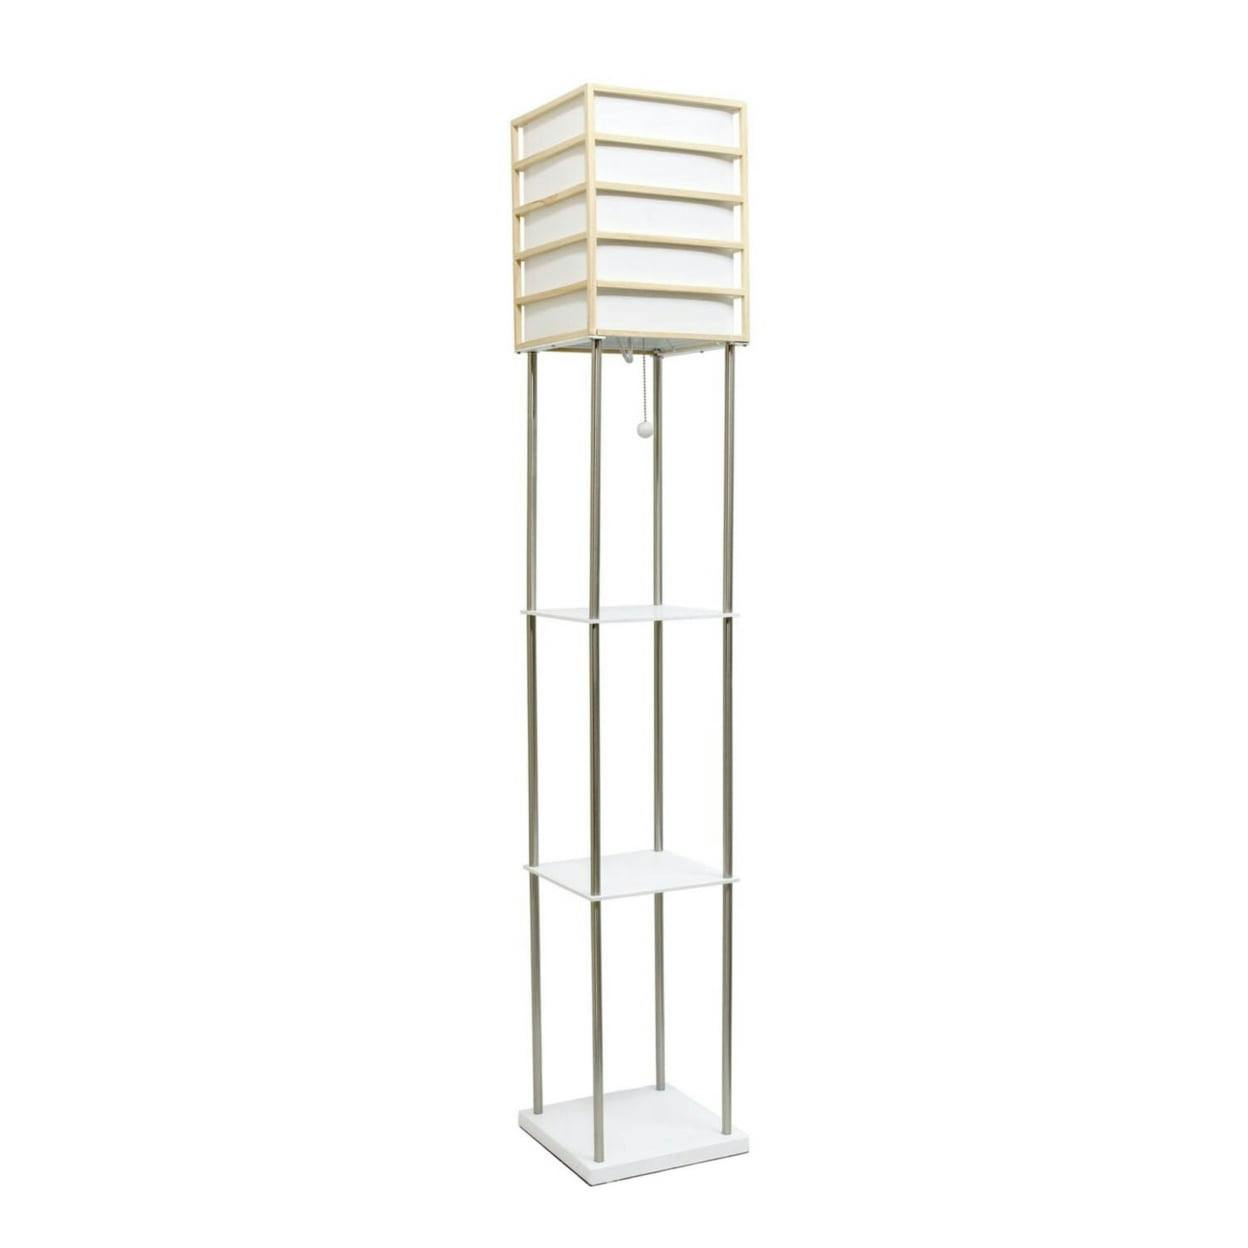 Sophisticated White Linen Shade Floor Lamp with Storage Shelves